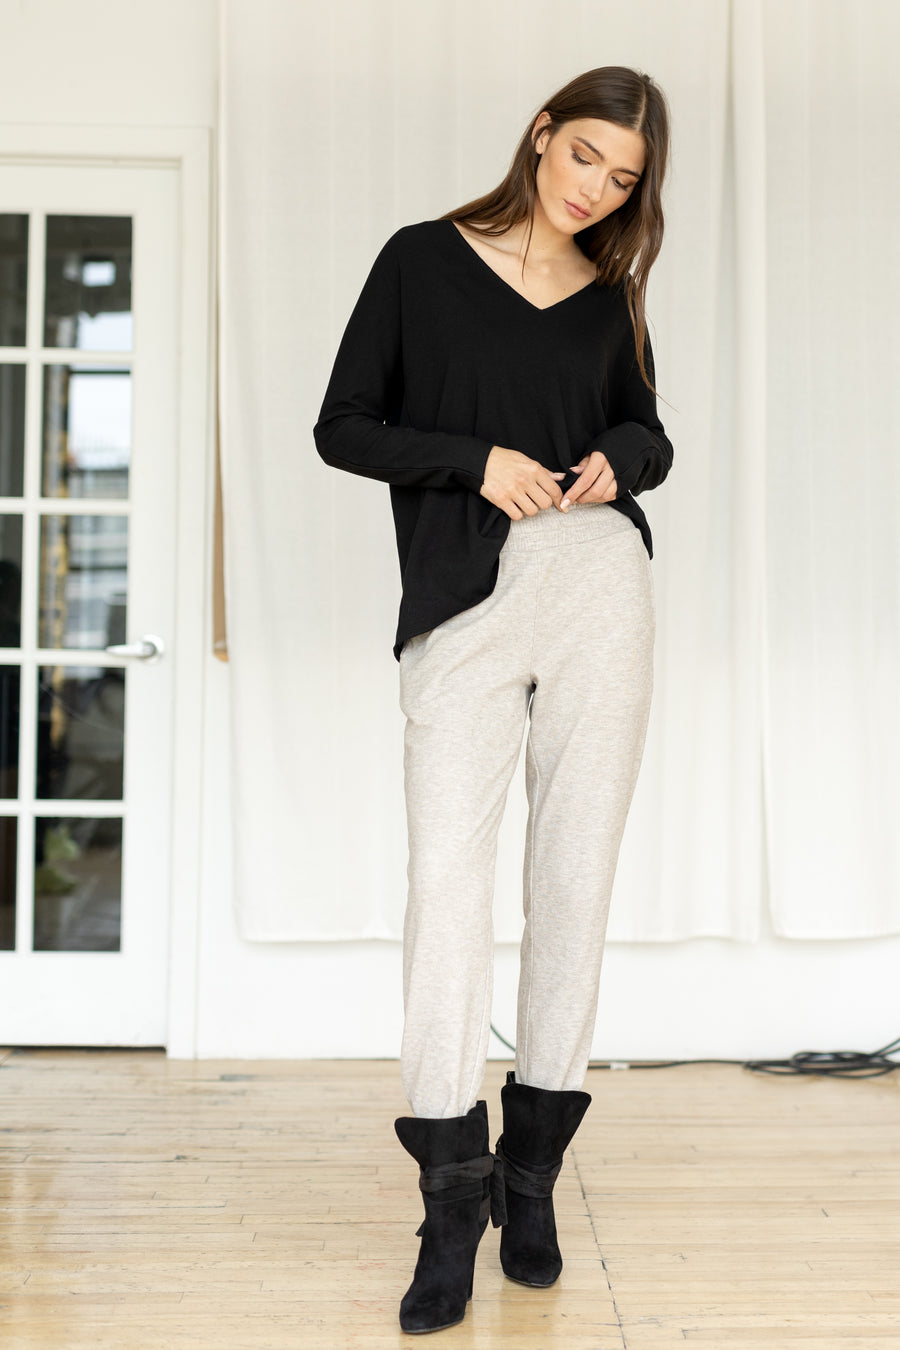 THE RELAXED LONG SLEEVE V-NECK